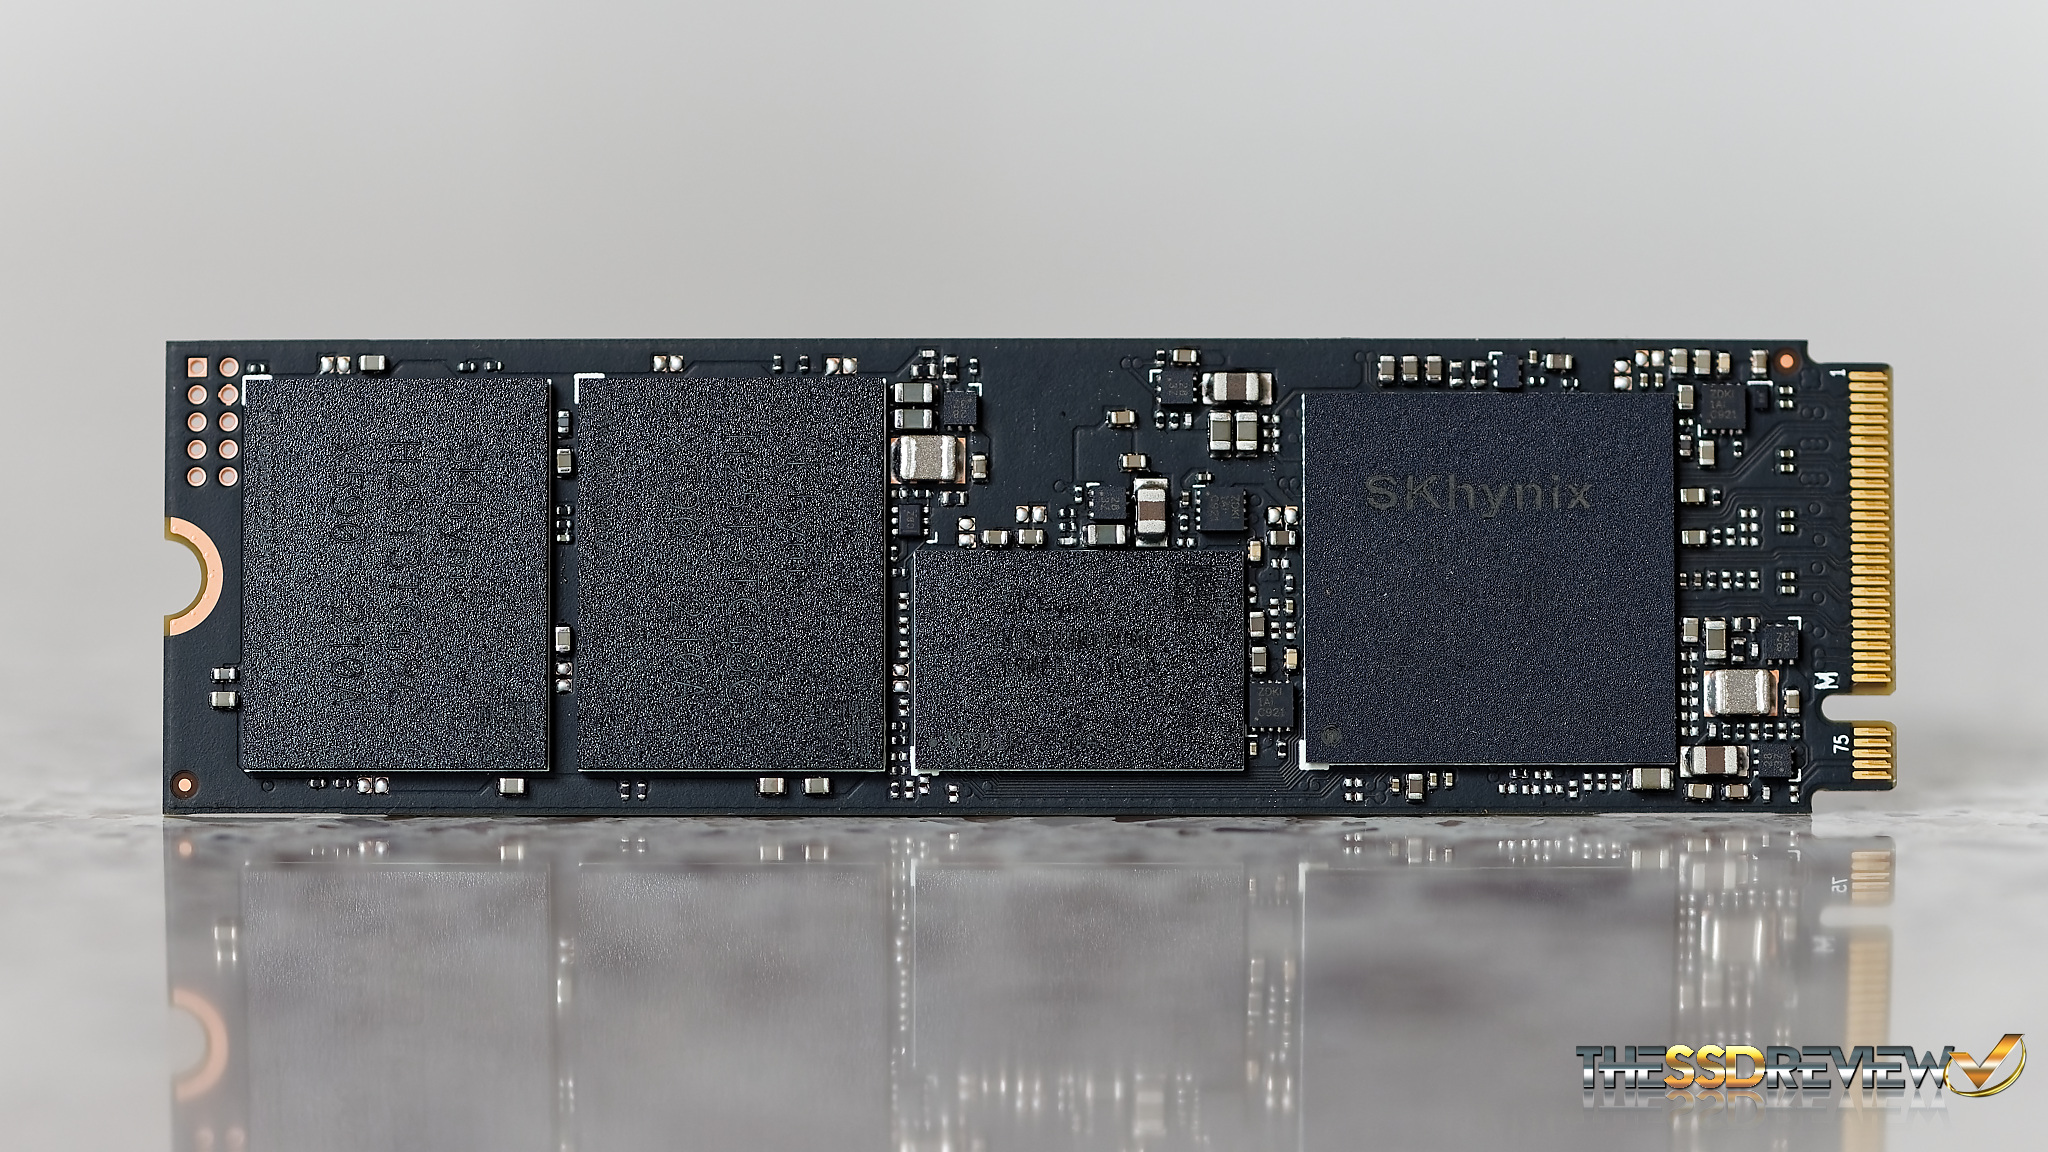 SK hynix Platinum P41 SSD Review - Can Gen4 Get Any Better than This?